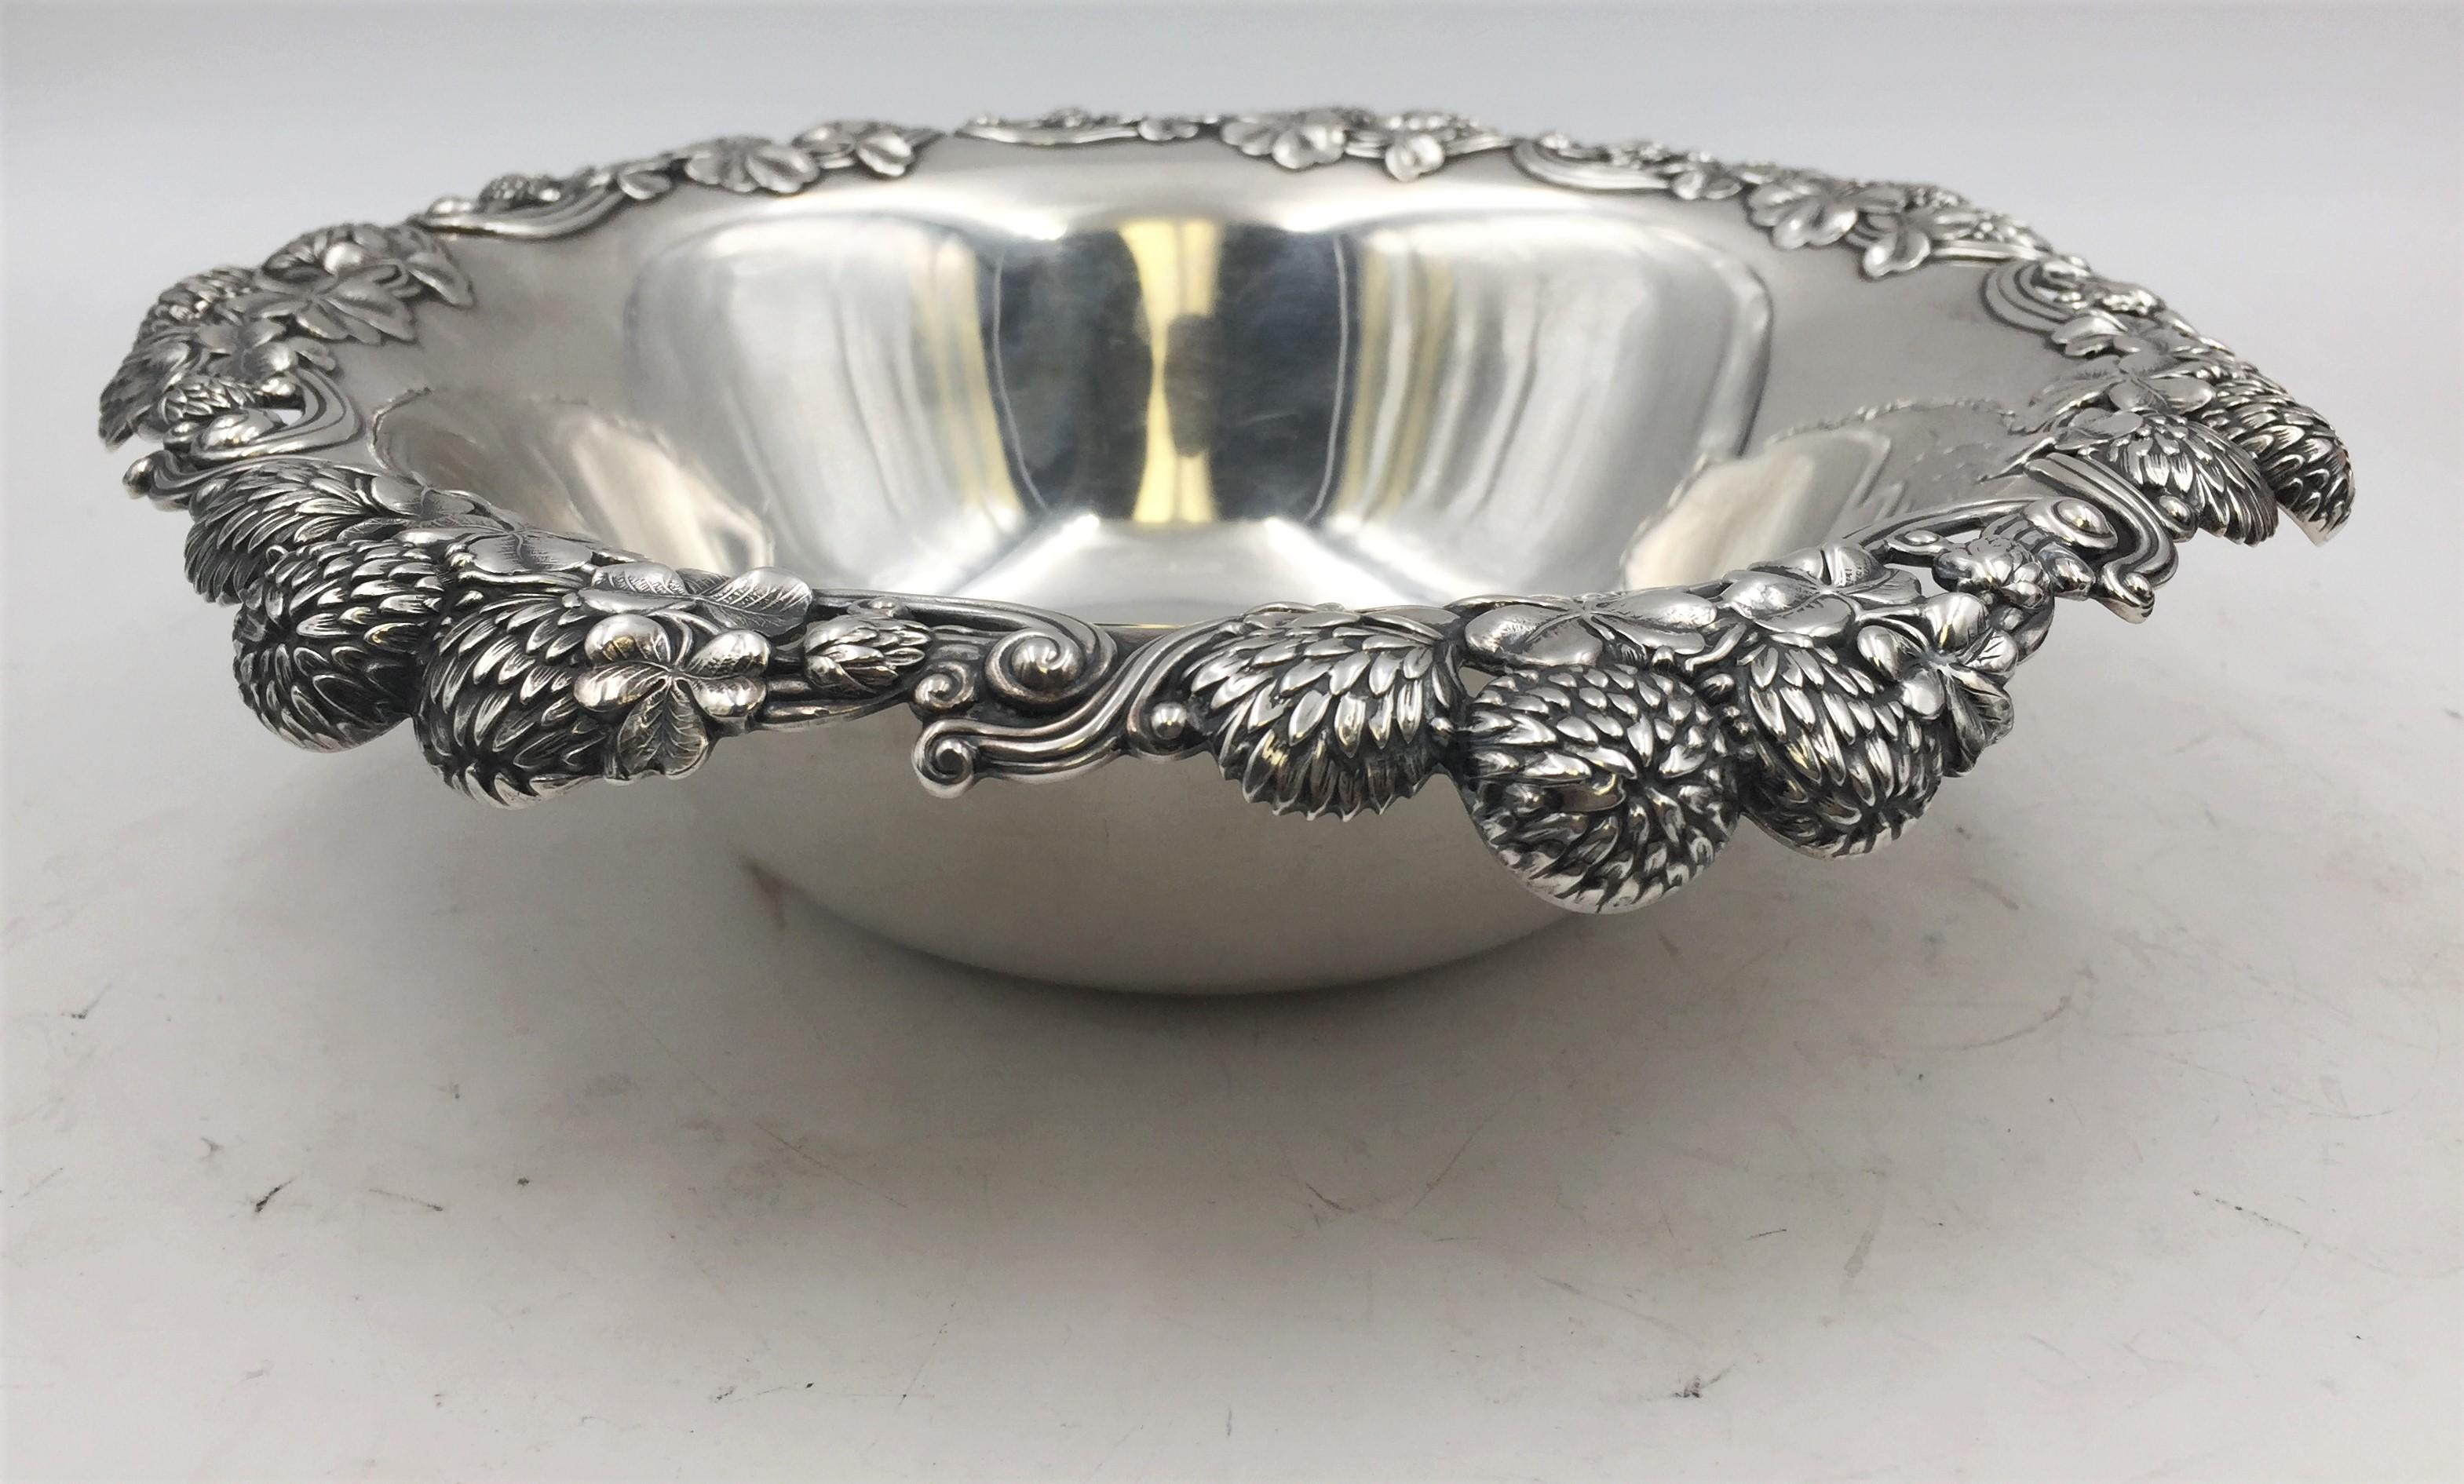 Tiffany & Co. sterling silver berry bowl in Art Nouveau style and in Clover pattern in pattern 13780 from 1898 with exquisite applied motifs around the rim. It measures 10” in diameter by 2 ¾” in height, weighs 16.8 ozt, and bears hallmarks and